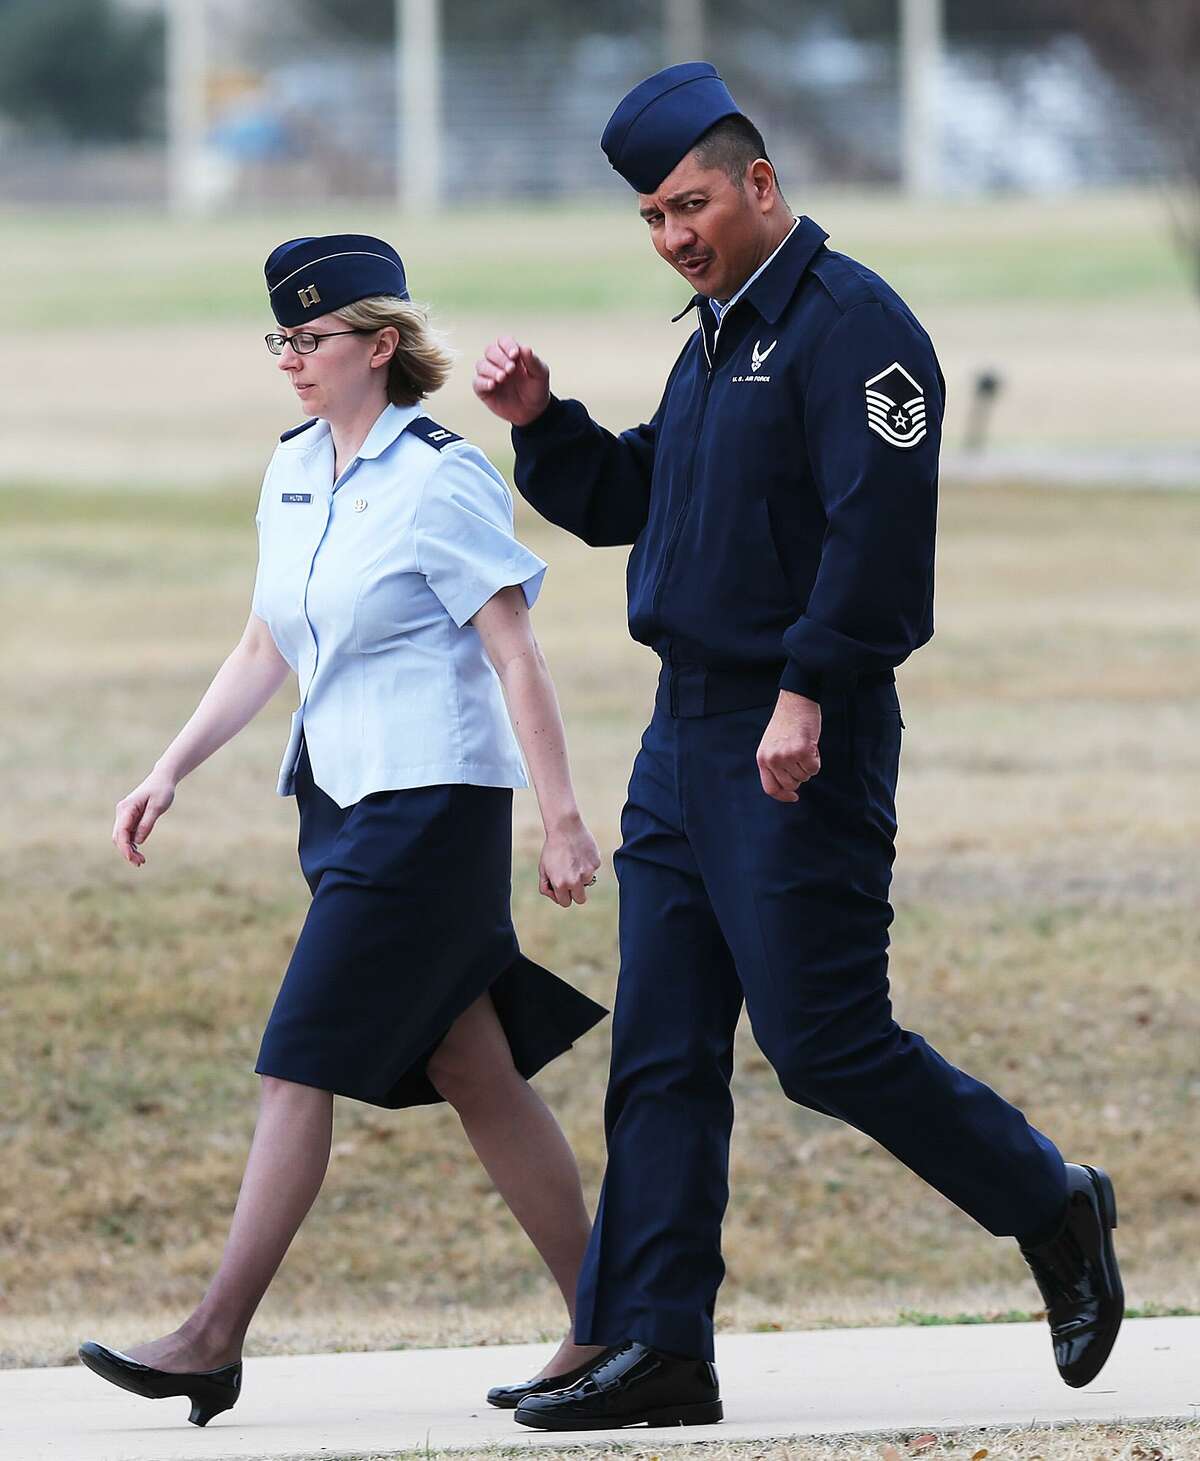 U.S. Air Force Master Sgt. Michael Silva, right, leaves an Article 32 hearing at Lackland Air Force, Monday, Feb. 24, 2013 with Capt. Theresa Hilton, his military defense lawyer. Silva is charged with raping three women over the past 21 years. He faces life in prison if convicted.